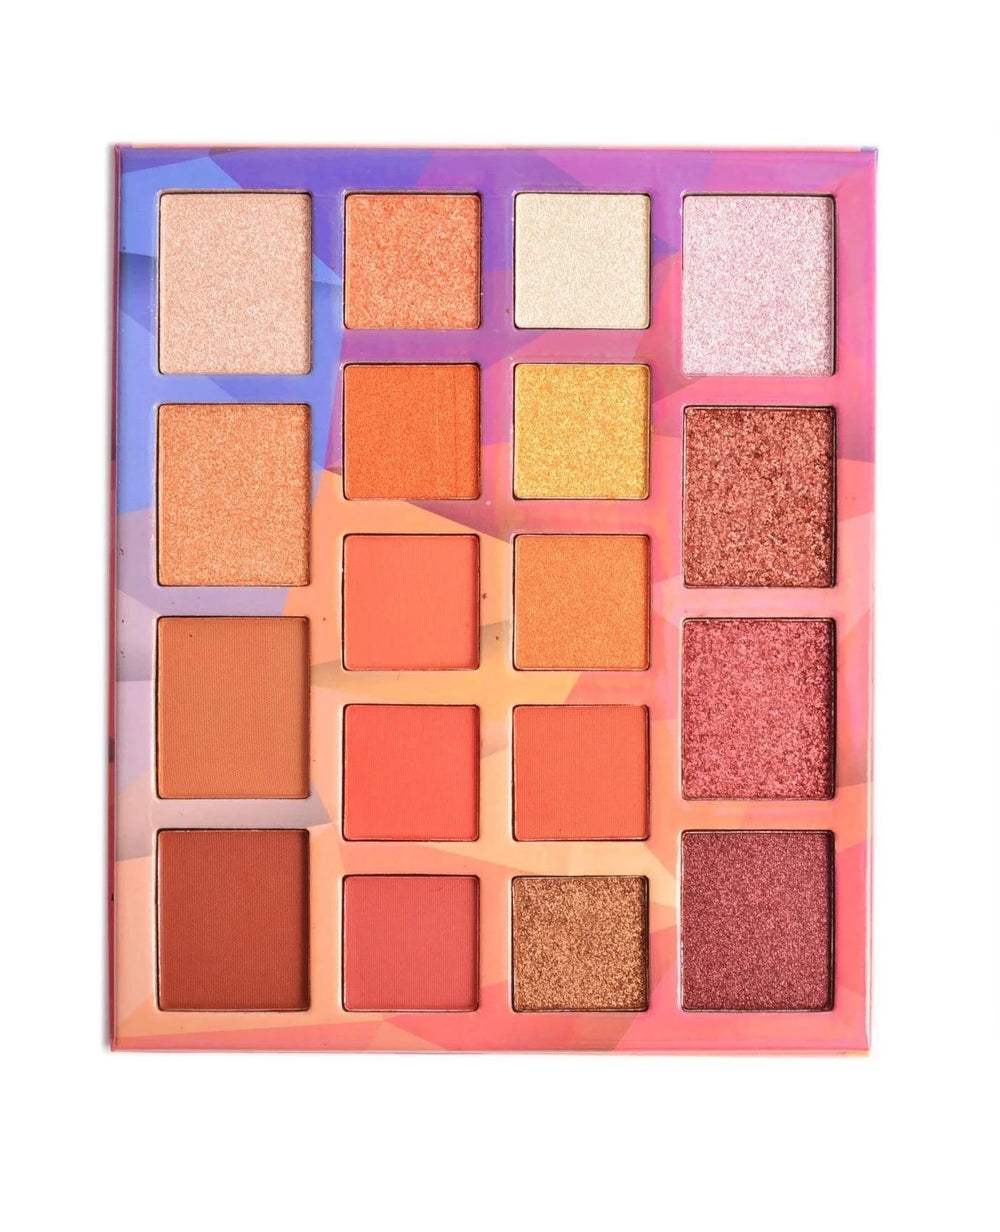 Prolux Prismatic Eyeshadow Palette, COSMETIC